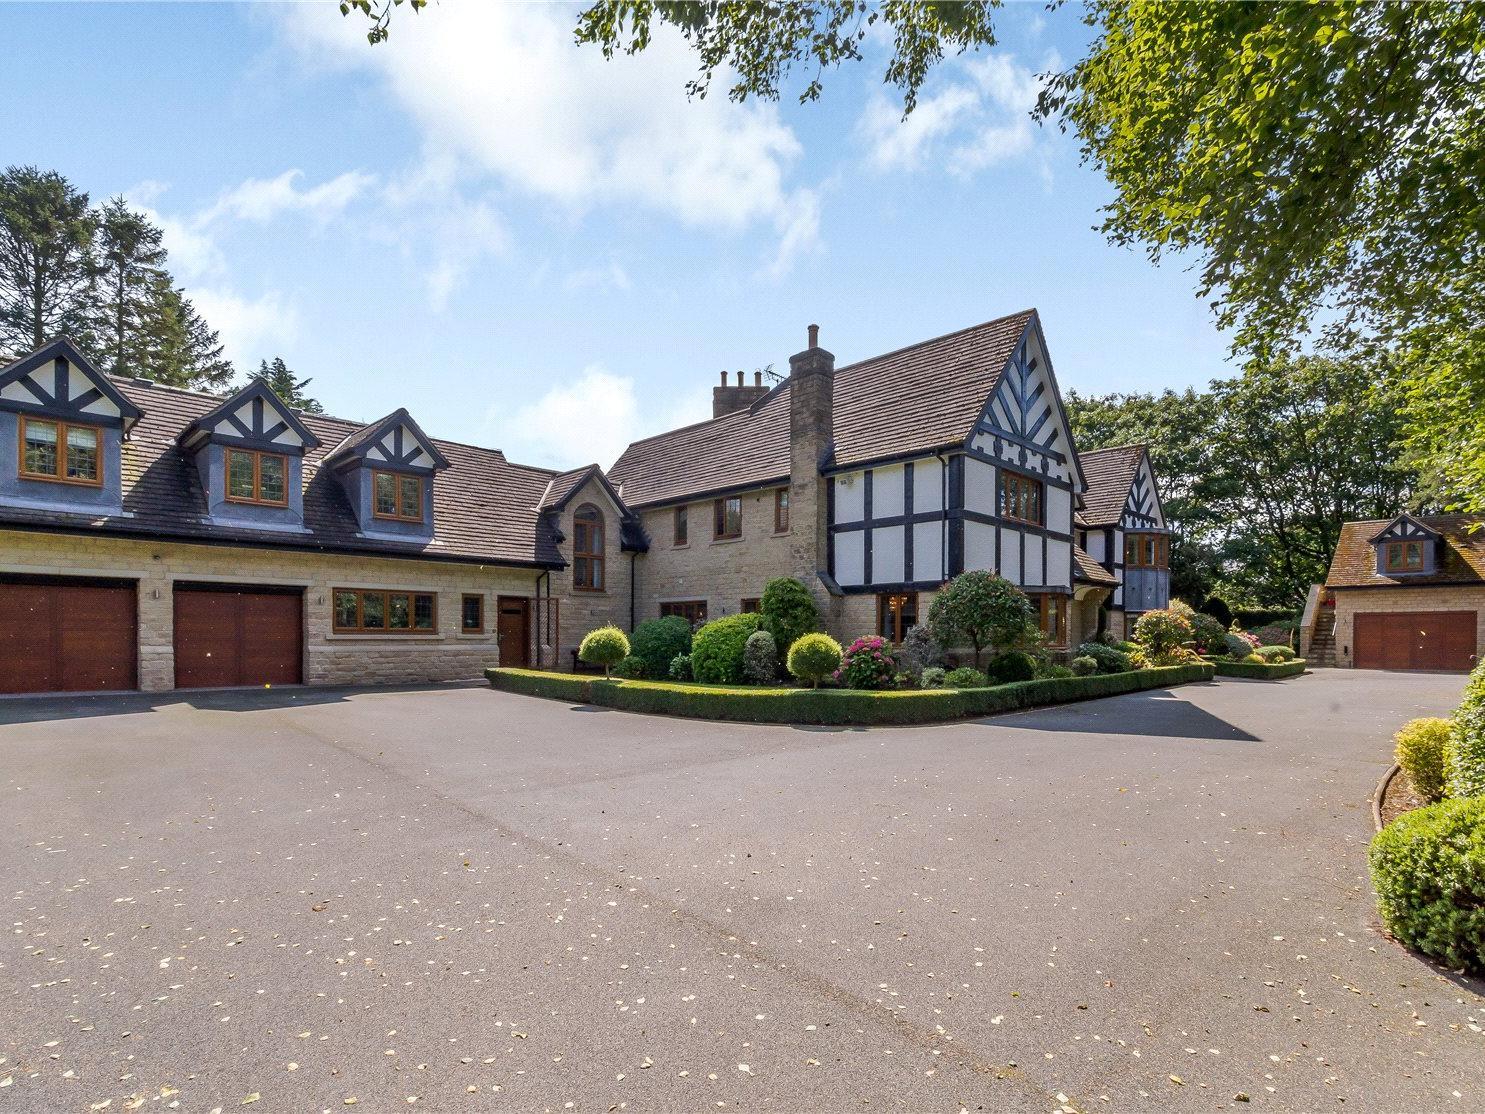 The Manor is One of Leeds Finest homes standing in private landscaped gardens adjoining Alwoodley Golf Course in this exclusive North Leeds residential area. This outstanding family home provides over 10,200 sq ft of accommodation and has exquisitely fitted bespoke interiors.